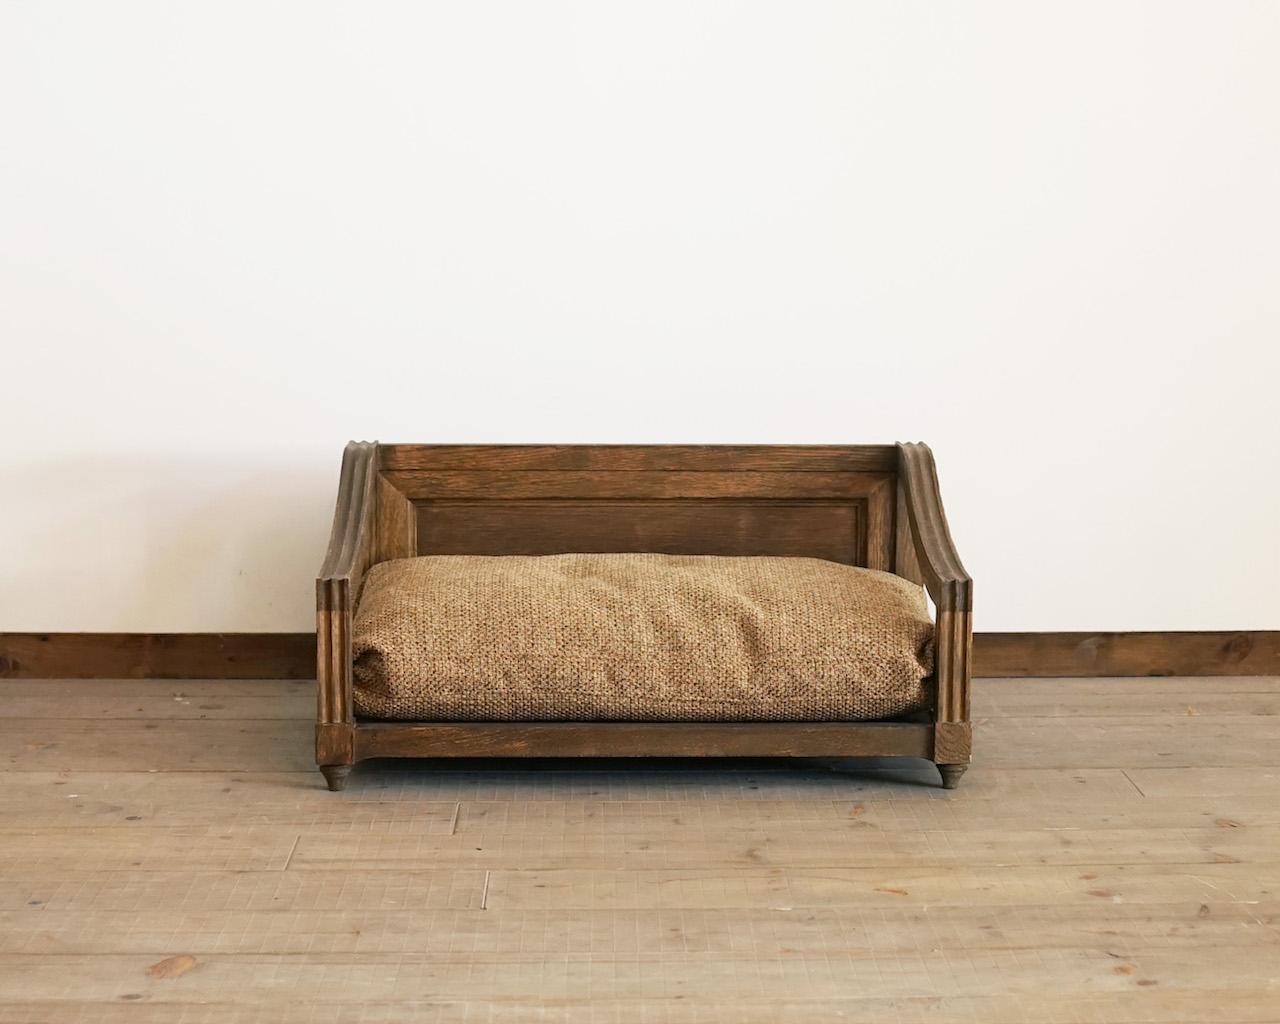 The bed is made of natural wood, with a soothing antique seat and a textured frame. Your pet is an important member of the family, and you want him or her to be able to relax in a bed that is both functional and attractive.
Your dog or cat needs a